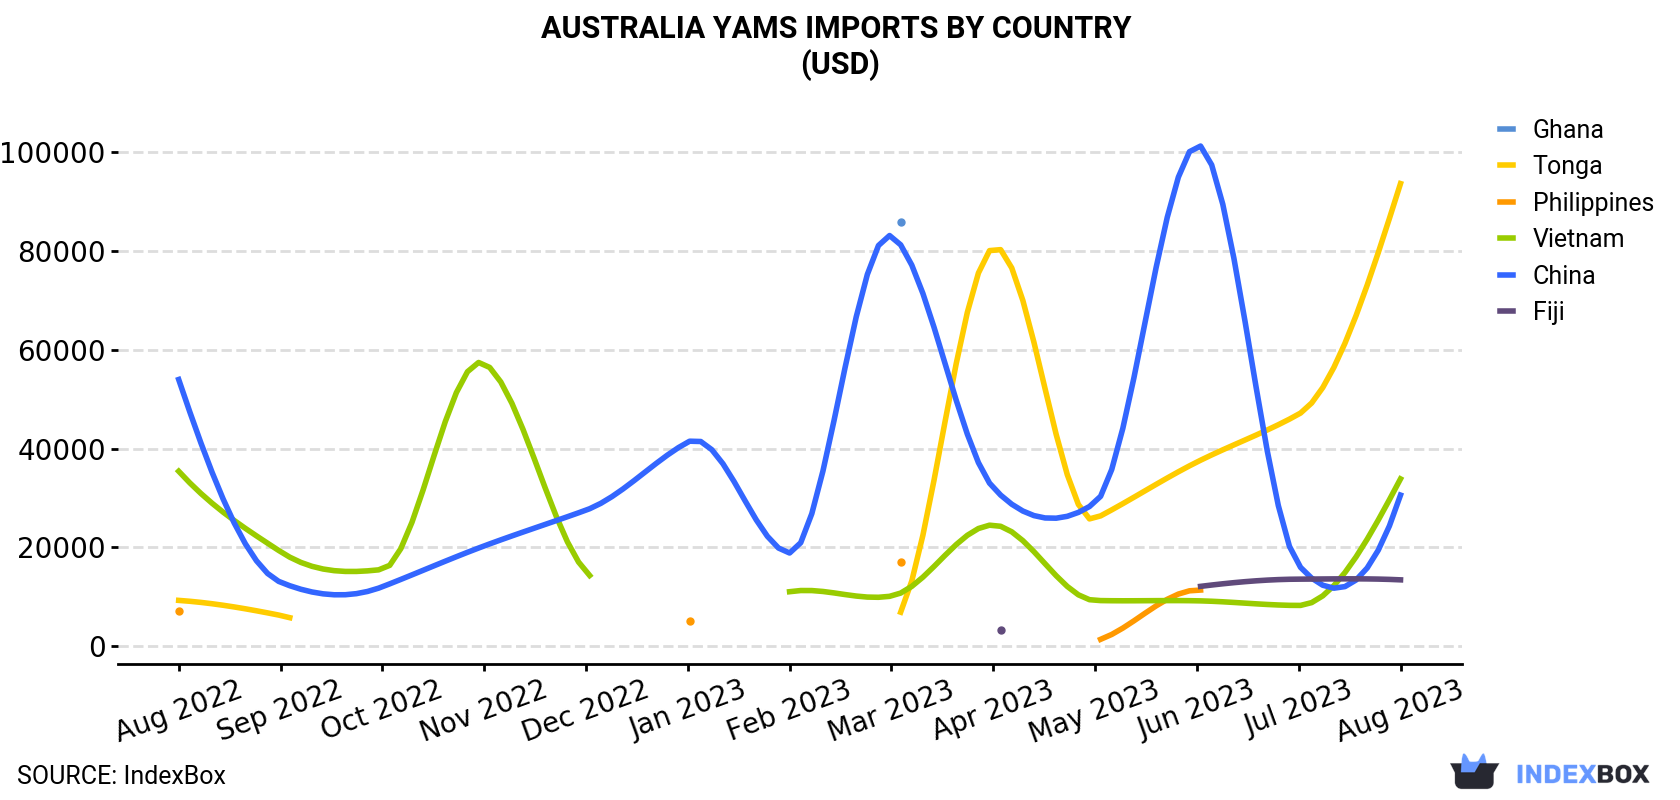 Australia Yams Imports By Country (USD)